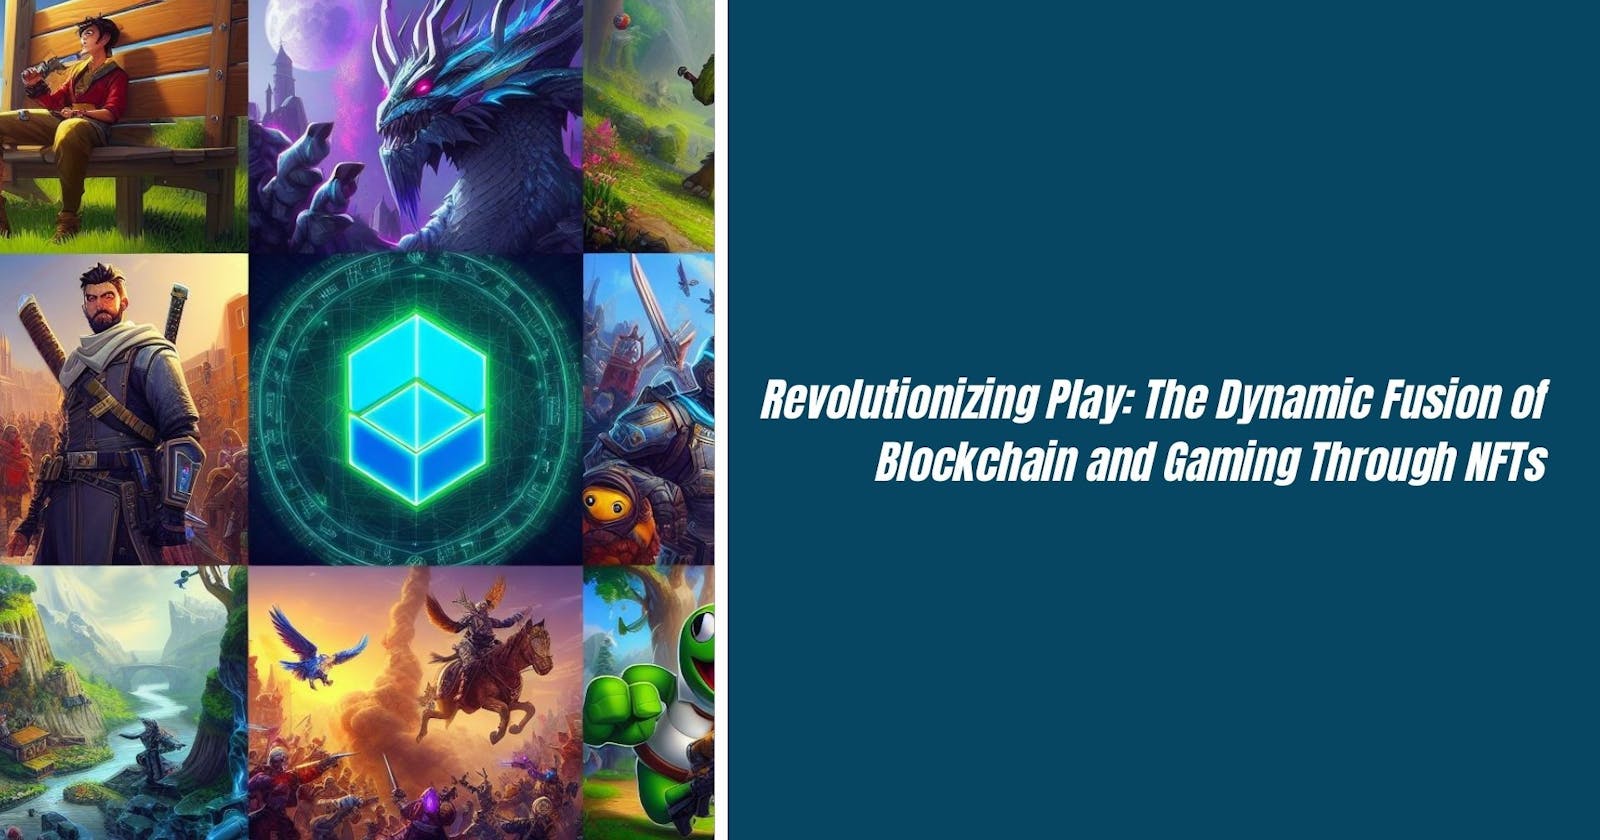 Revolutionizing Play: The Dynamic Fusion of Blockchain and Gaming Through NFTs